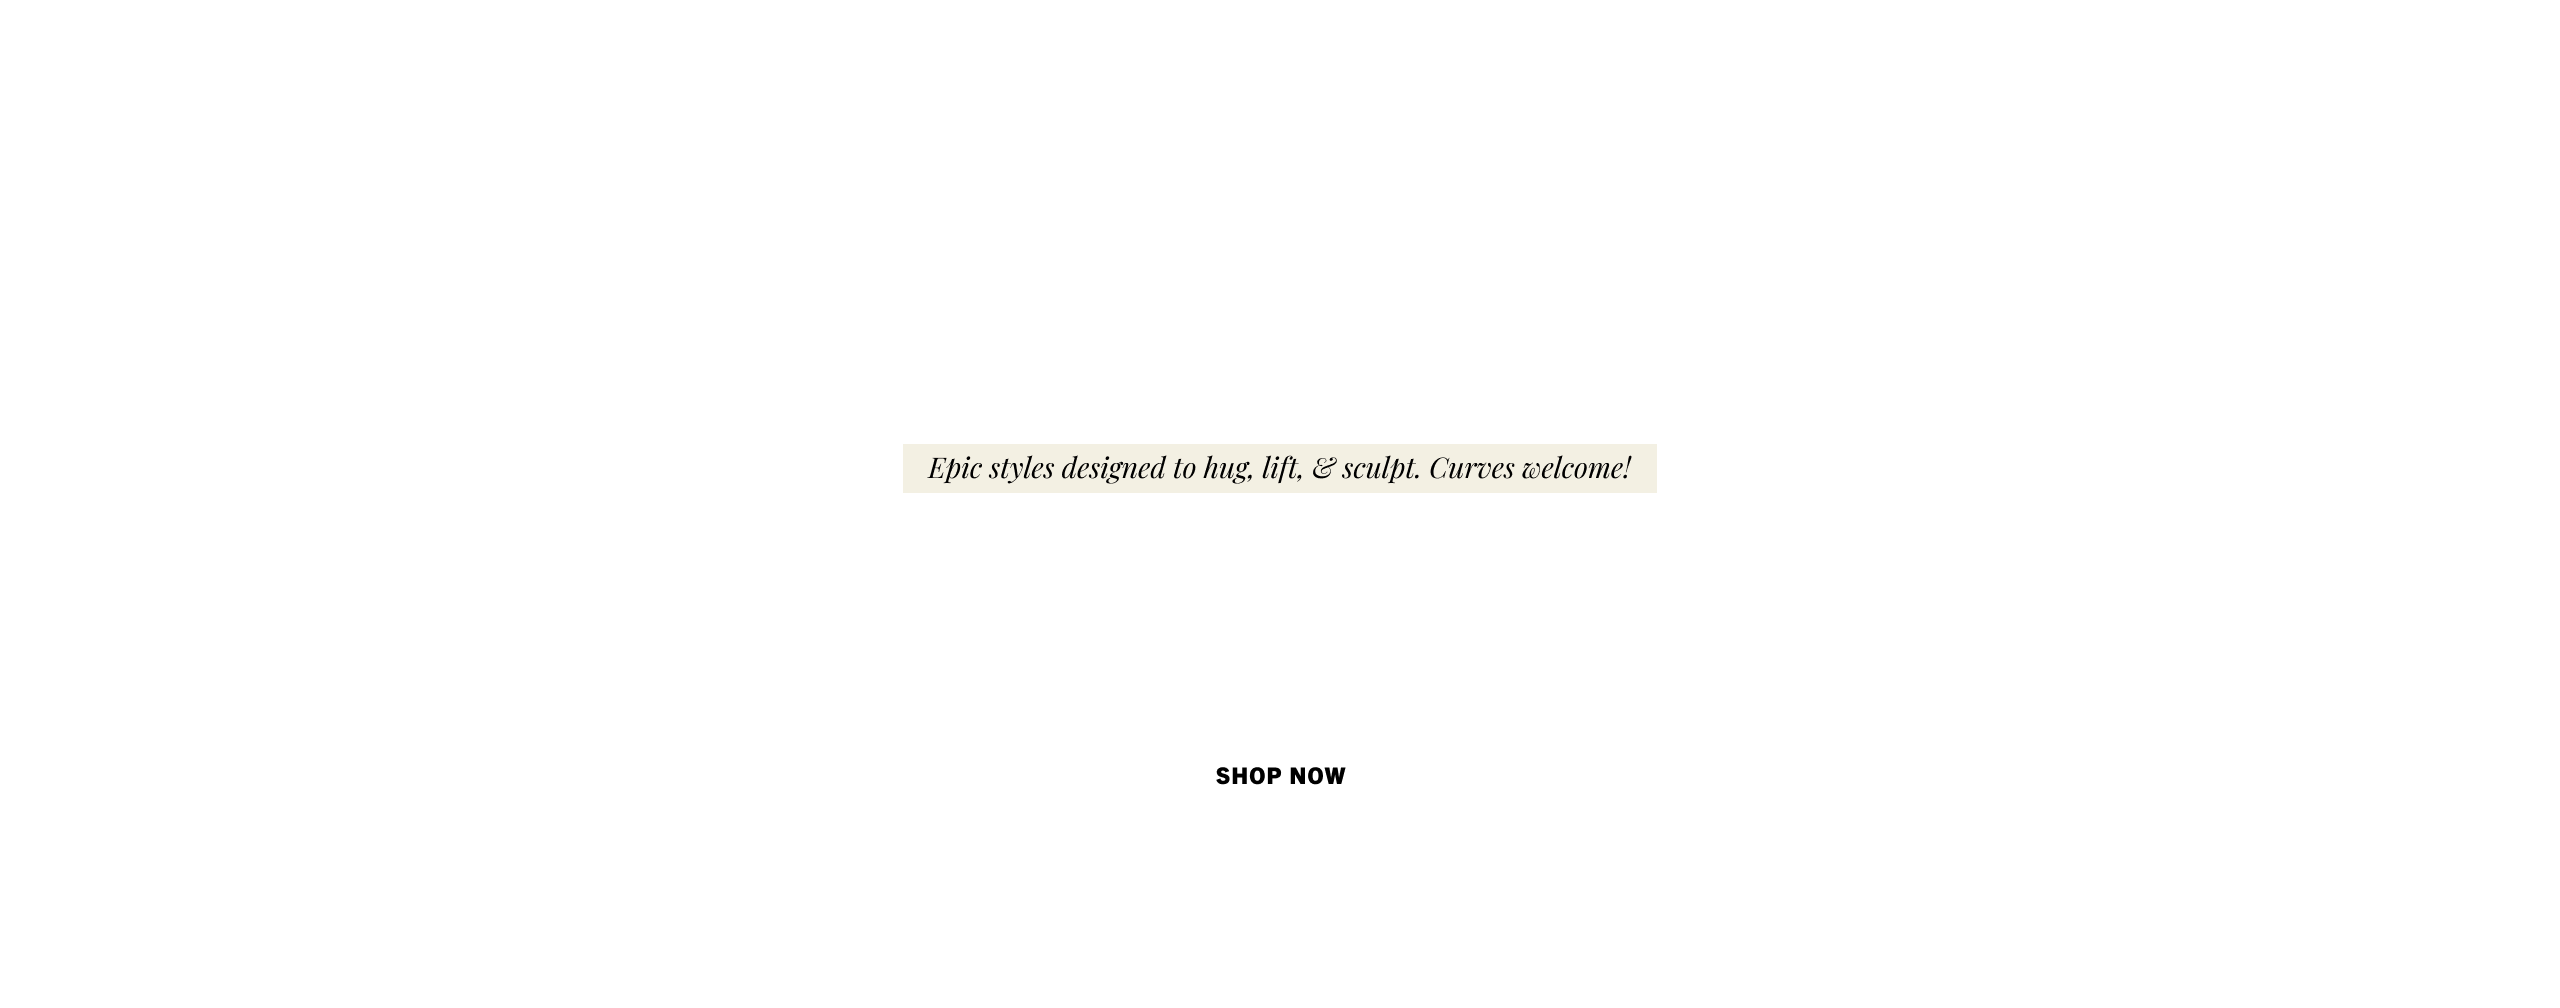 The biggest drop of the year: The Khloe Edit! Get 2 for $24 bottoms + 80% off everything when you join as a new VIP.